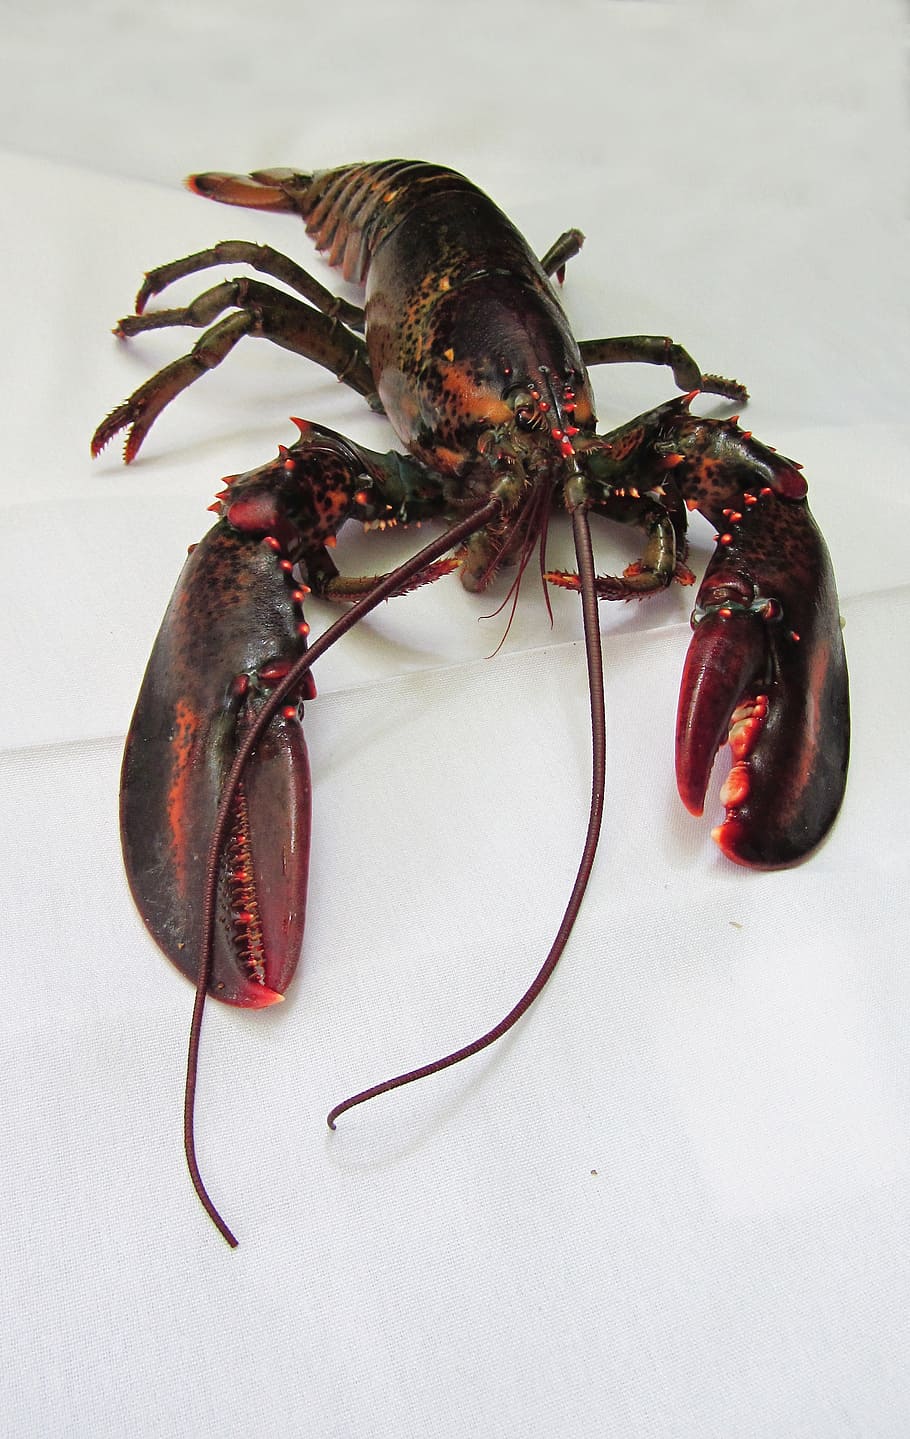 red and black lobster, maine lobster, seafood, gourmet, meal